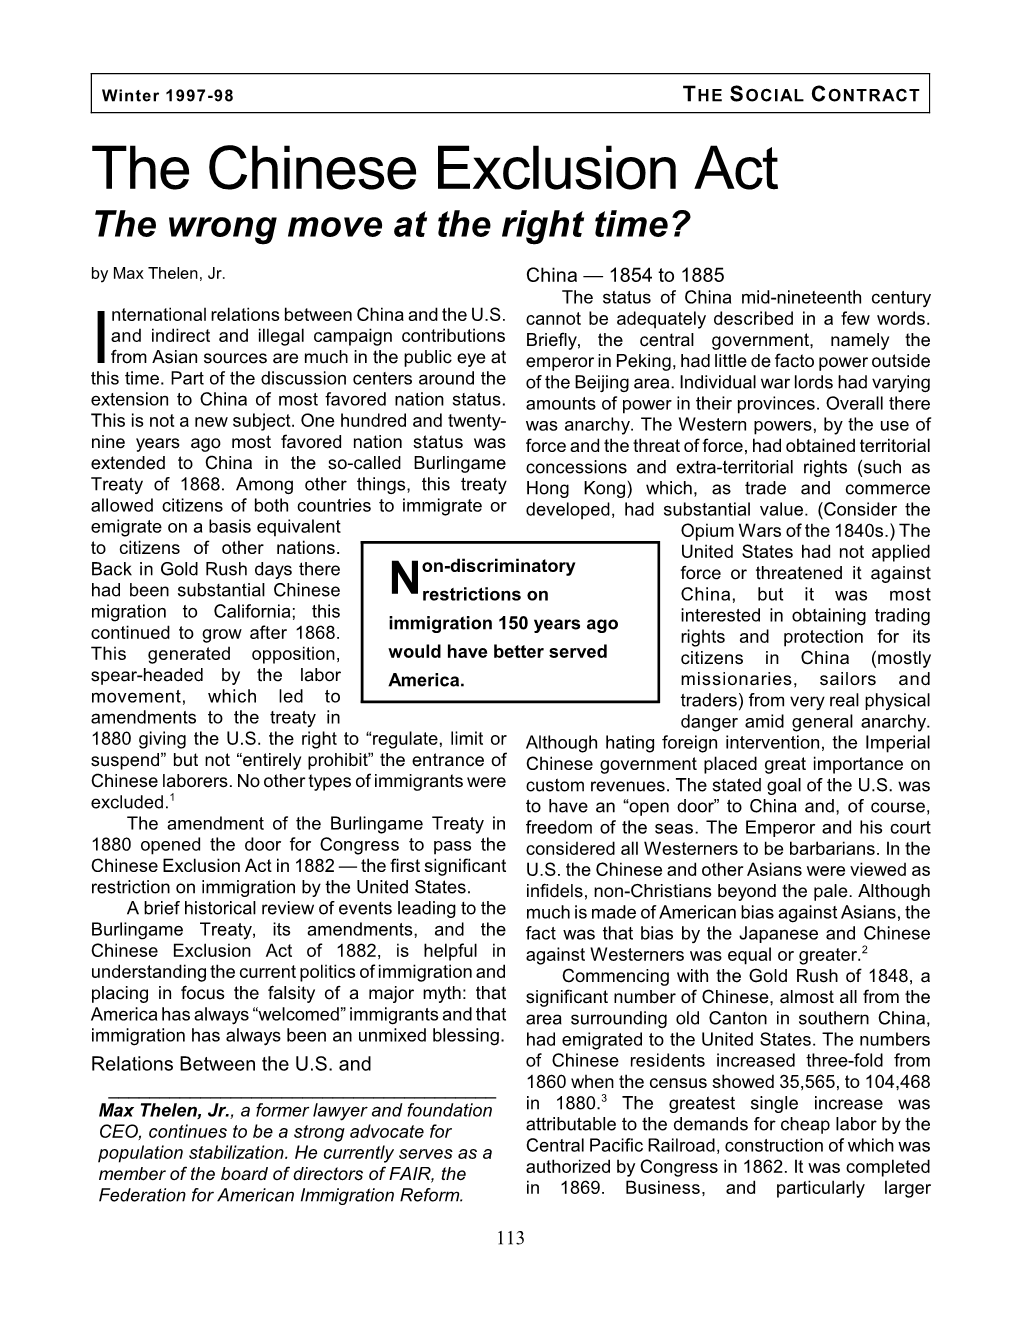 The Chinese Exclusion Act the Wrong Move at the Right Time? by Max Thelen, Jr